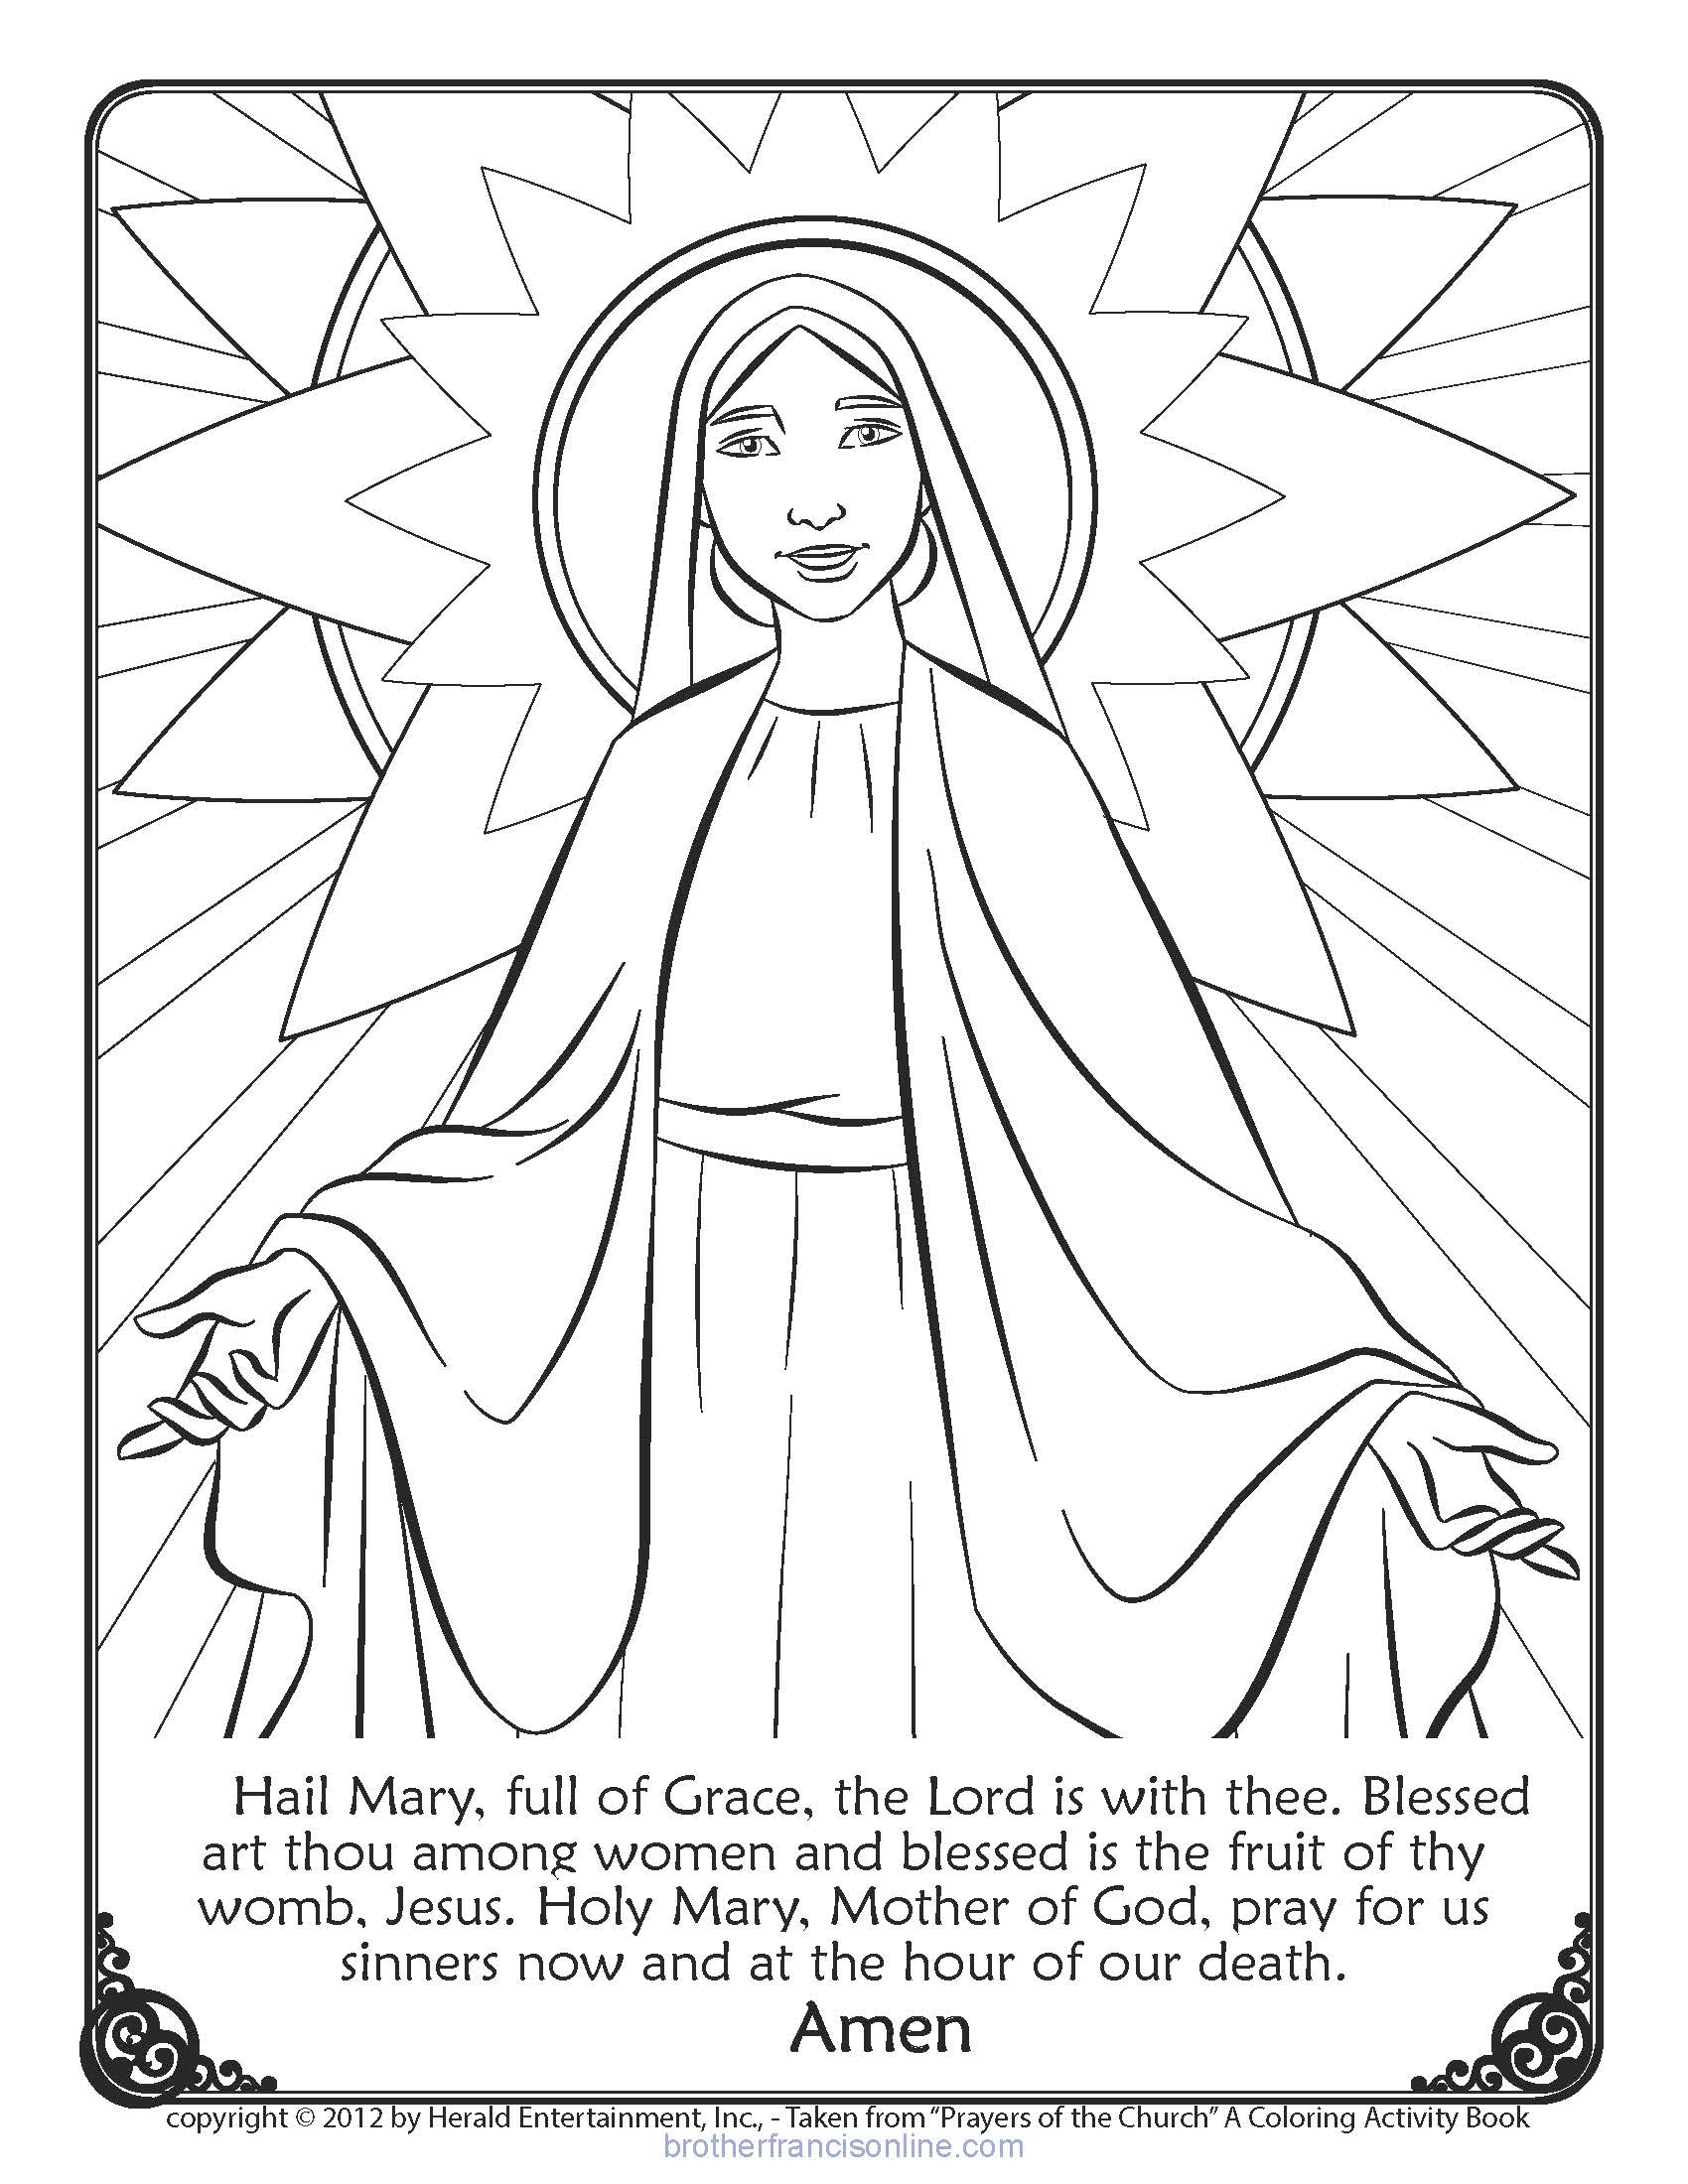 St Augustine Coloring Page August Downloads Brother Francis